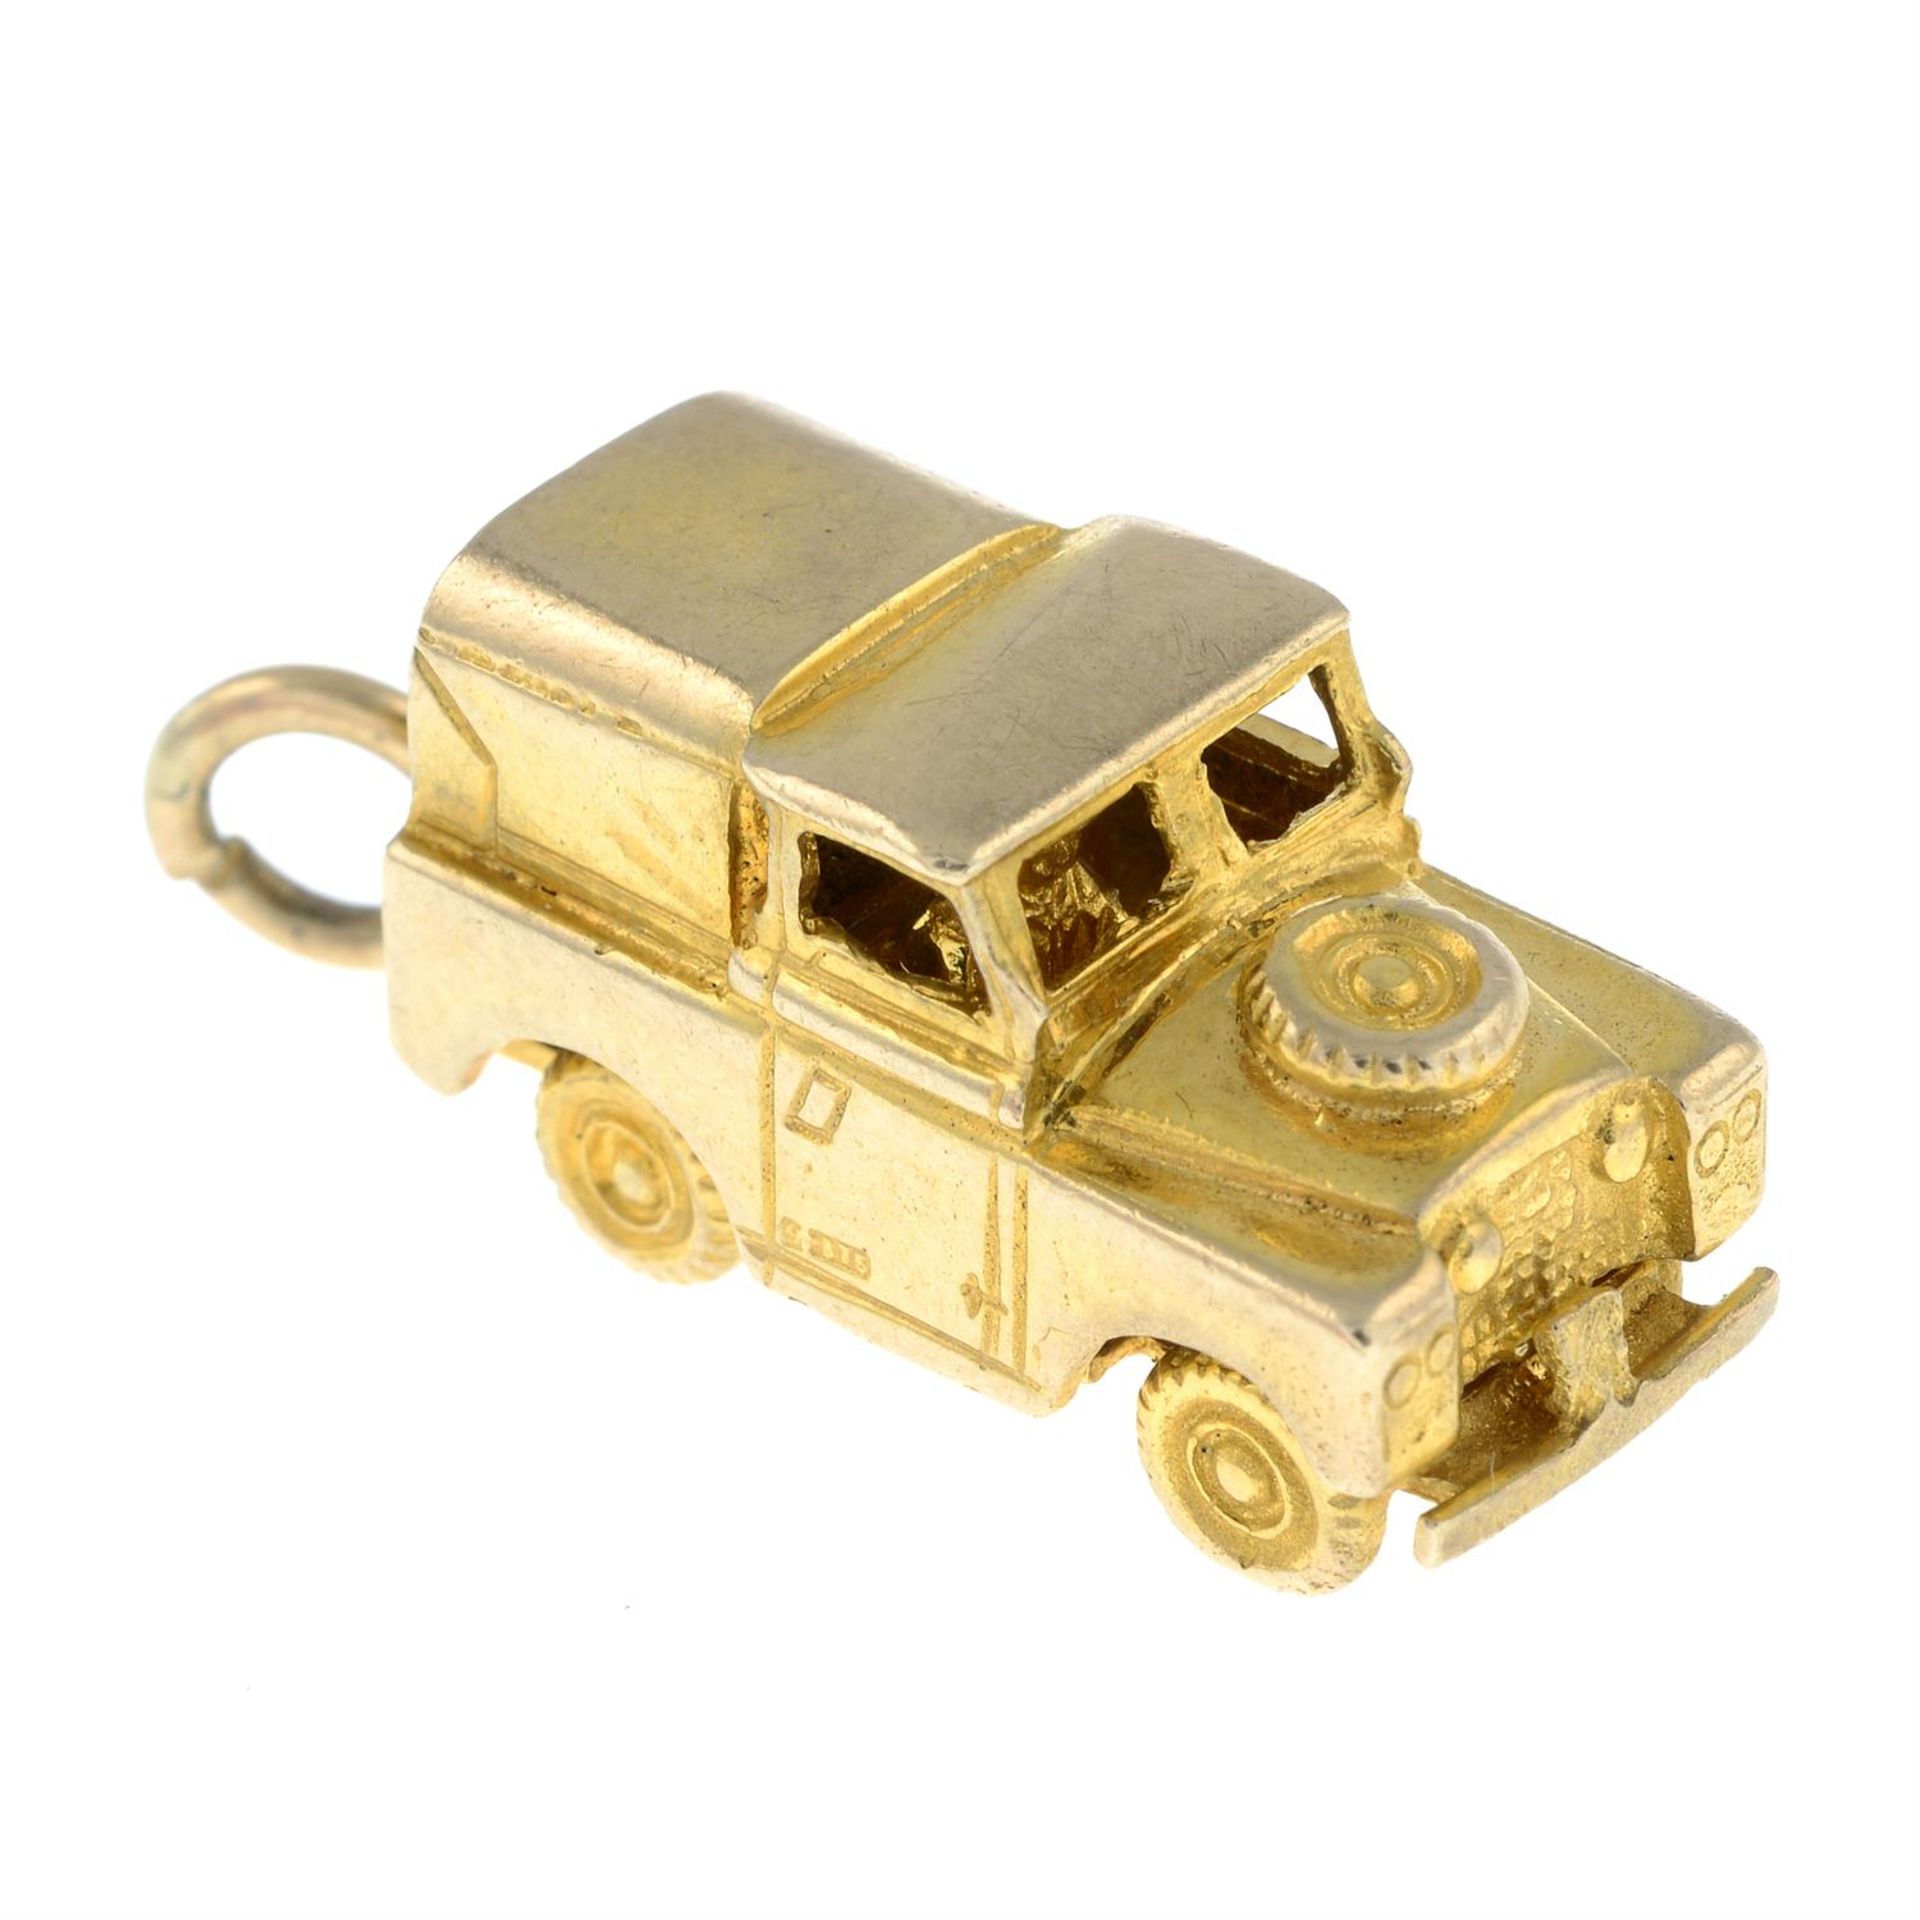 A 1960s 9ct gold Land Rover Series IIA charm.